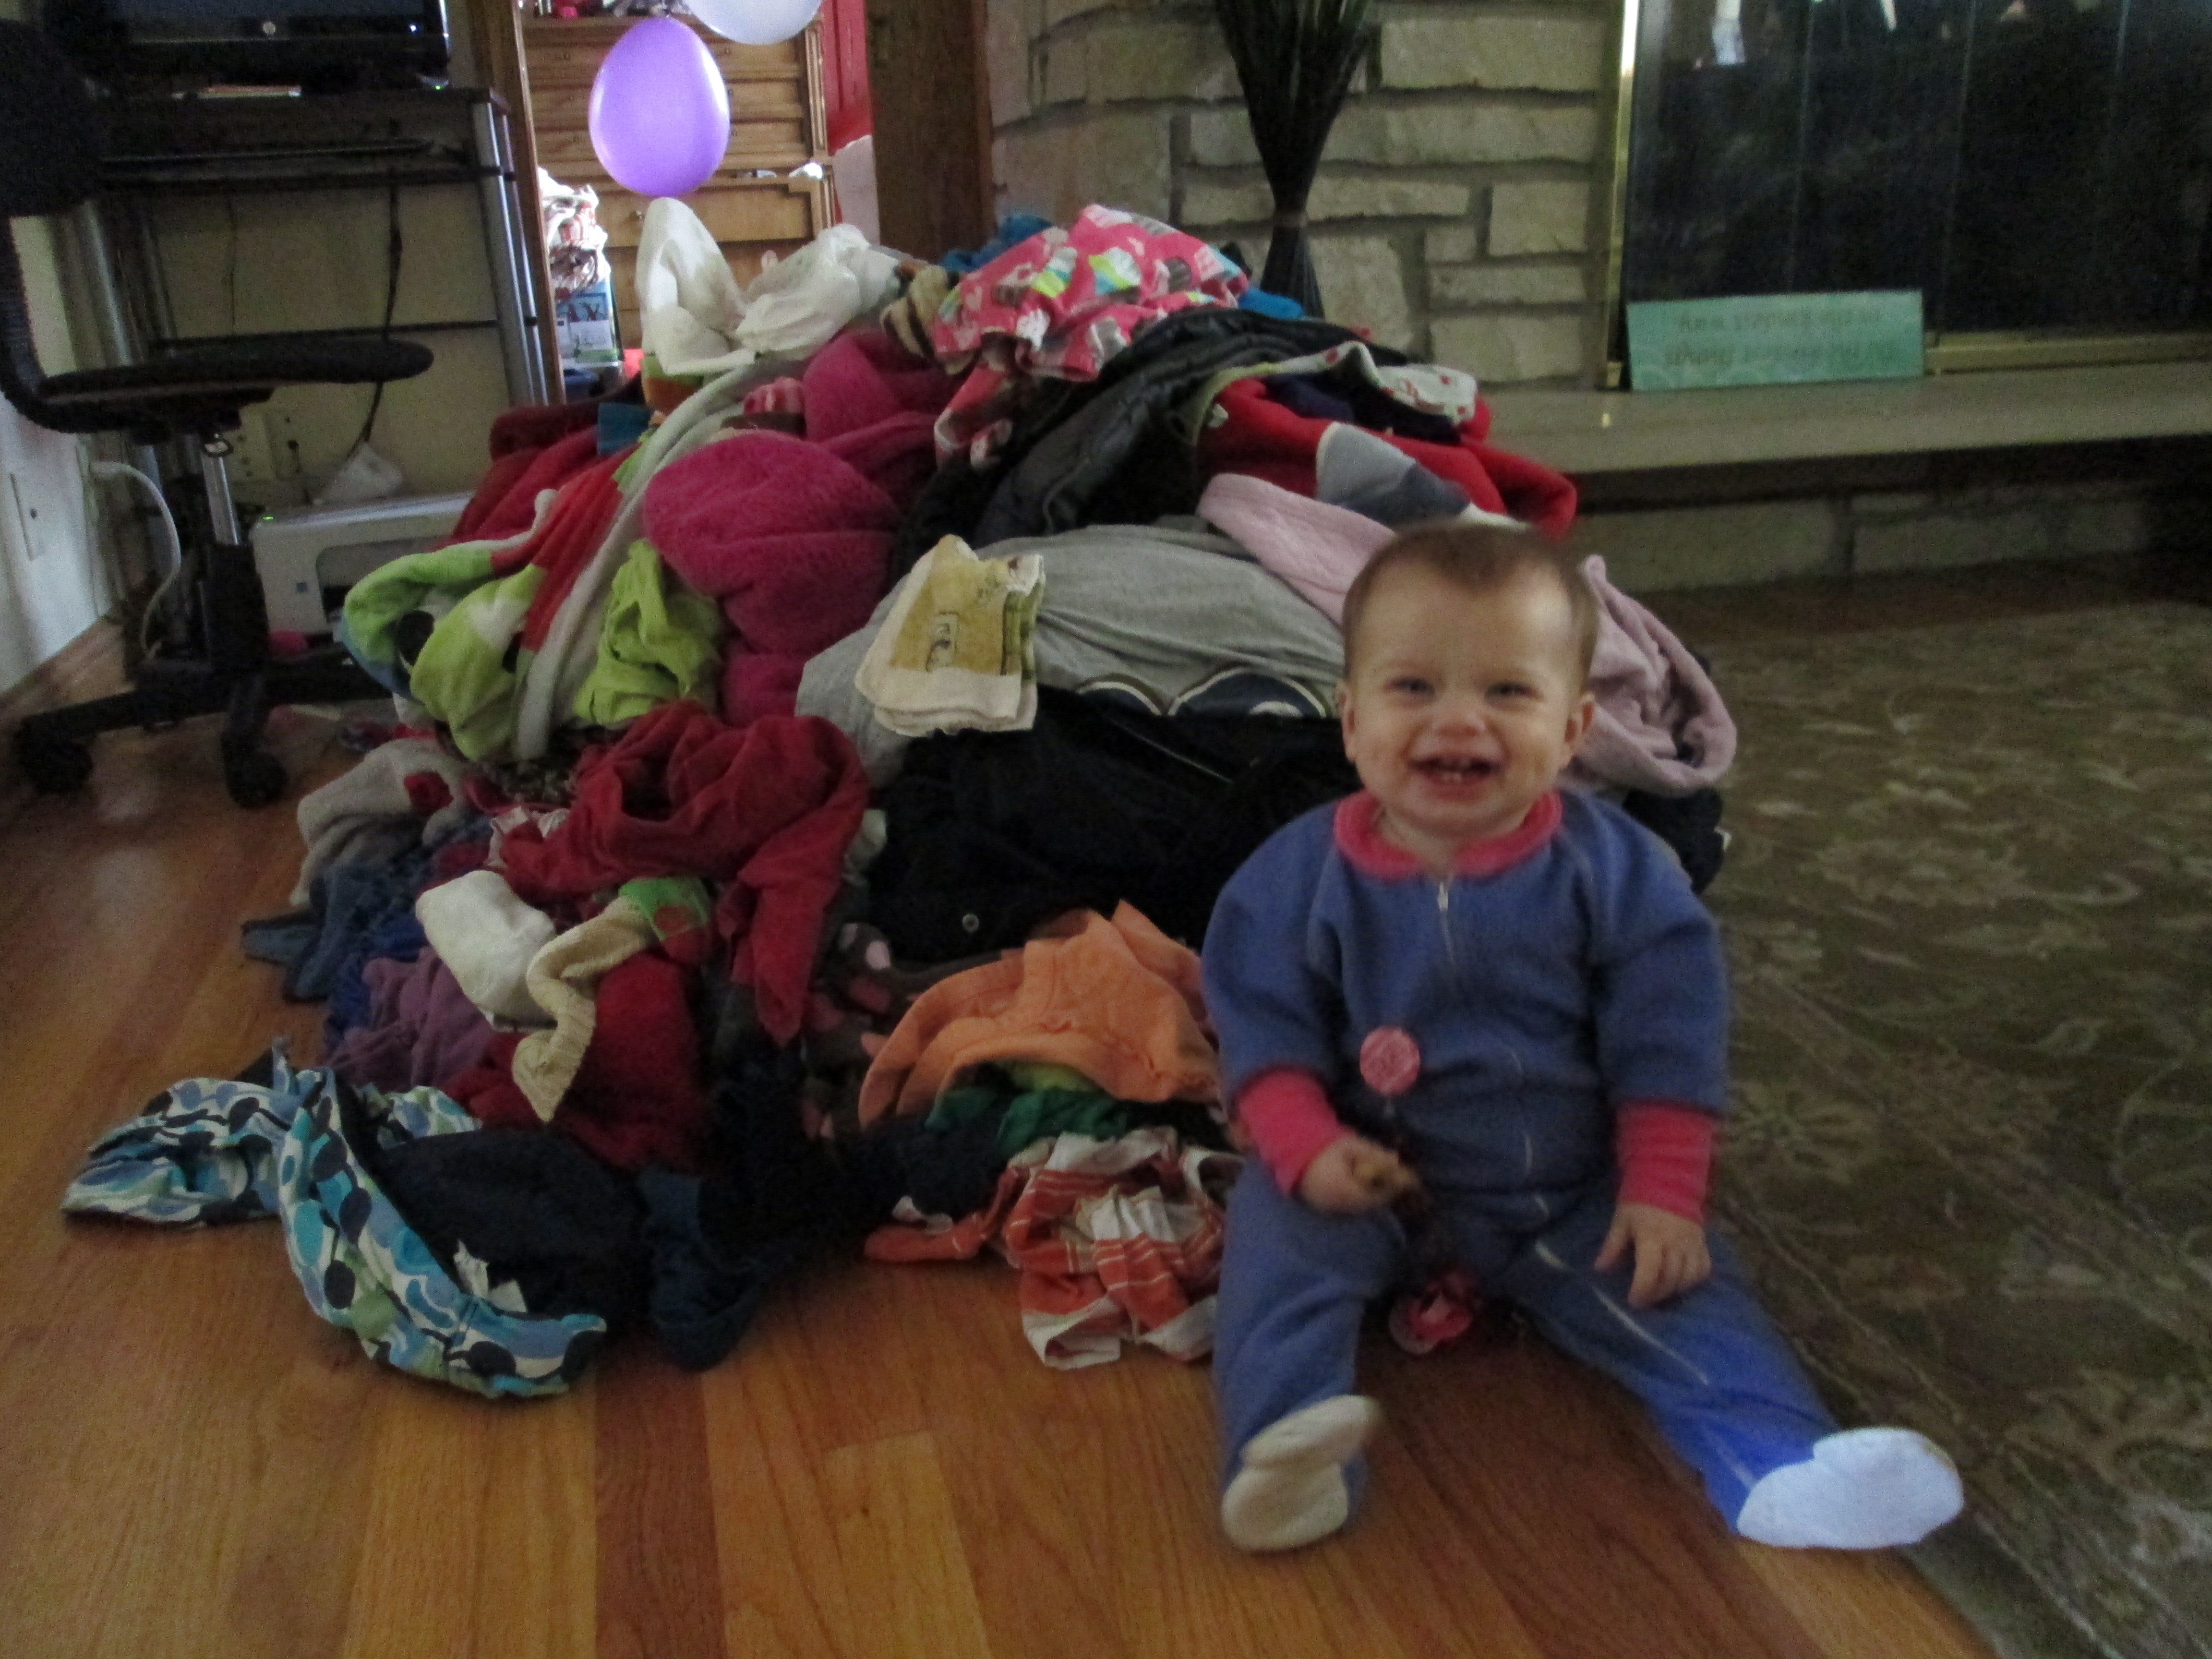 So do you see the HUGE pile!  It is so big!  Look at how happy Charli is!